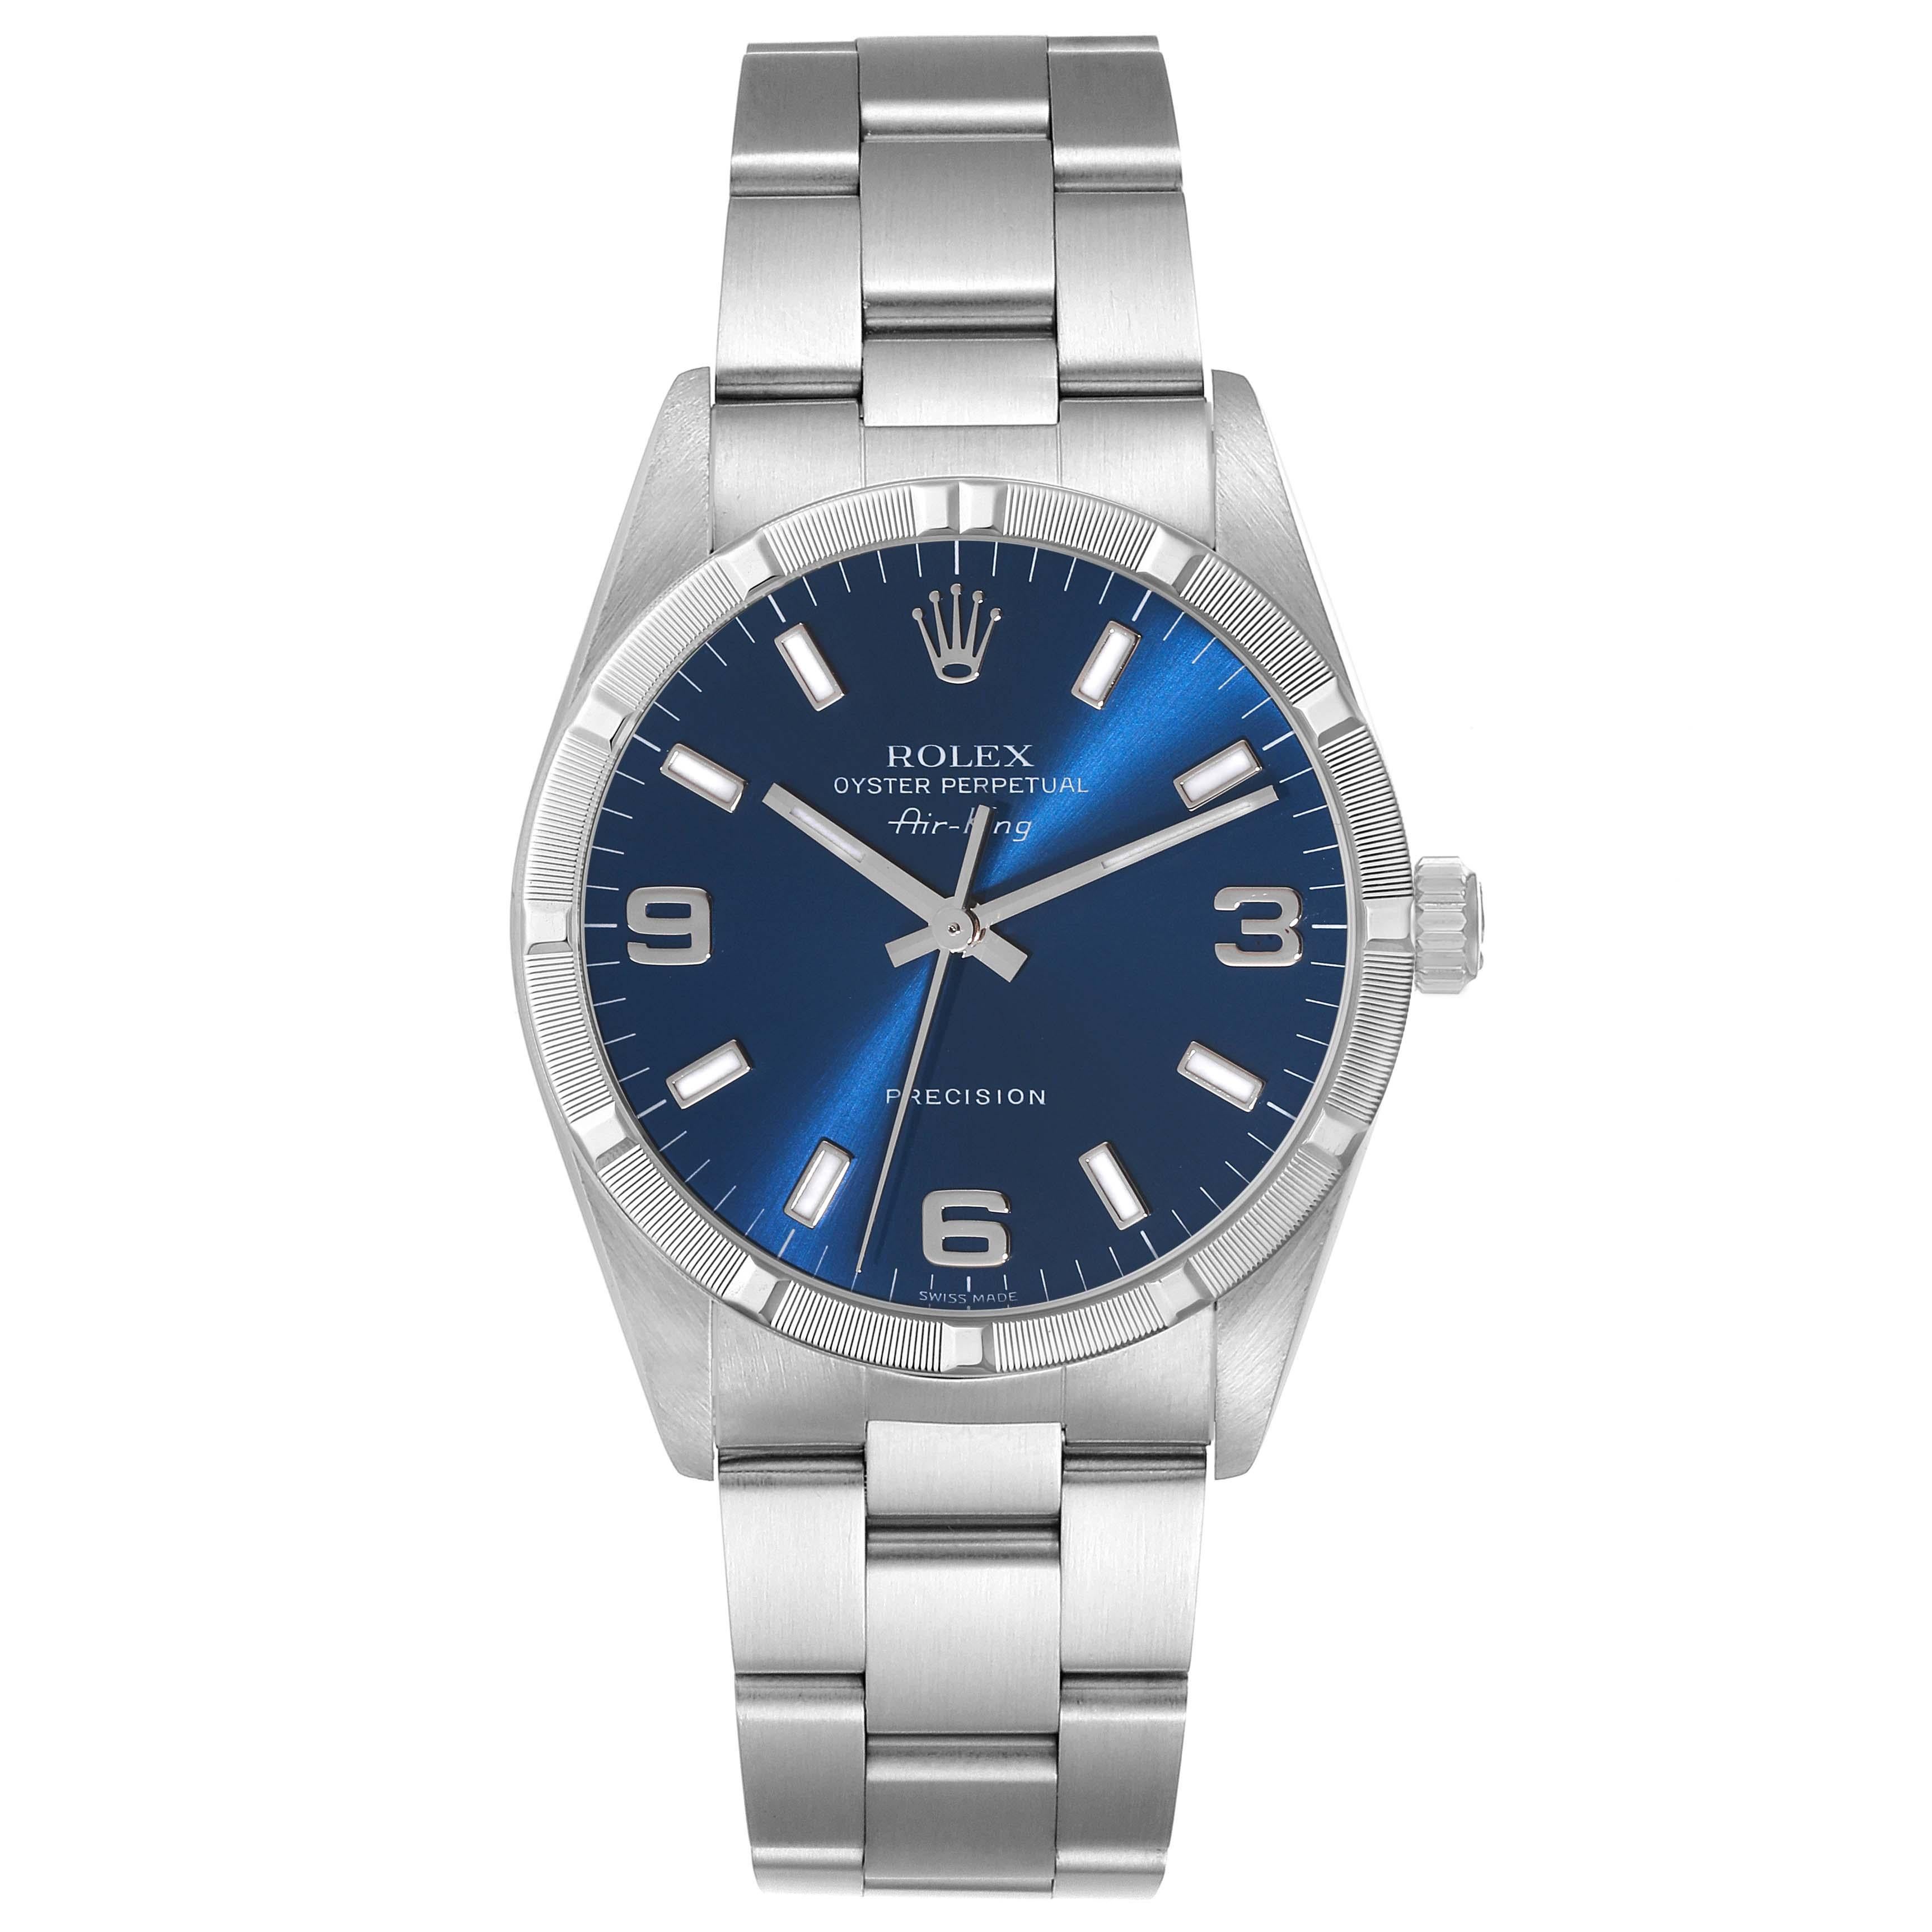 Rolex Air King Blue Dial Engine Turned Bezel Steel Mens Watch 14010. Automatic self-winding movement. Stainless steel case 34 mm in diameter. Rolex logo on the crown. Stainless steel engine turned bezel. Scratch resistant sapphire crystal. Blue dial